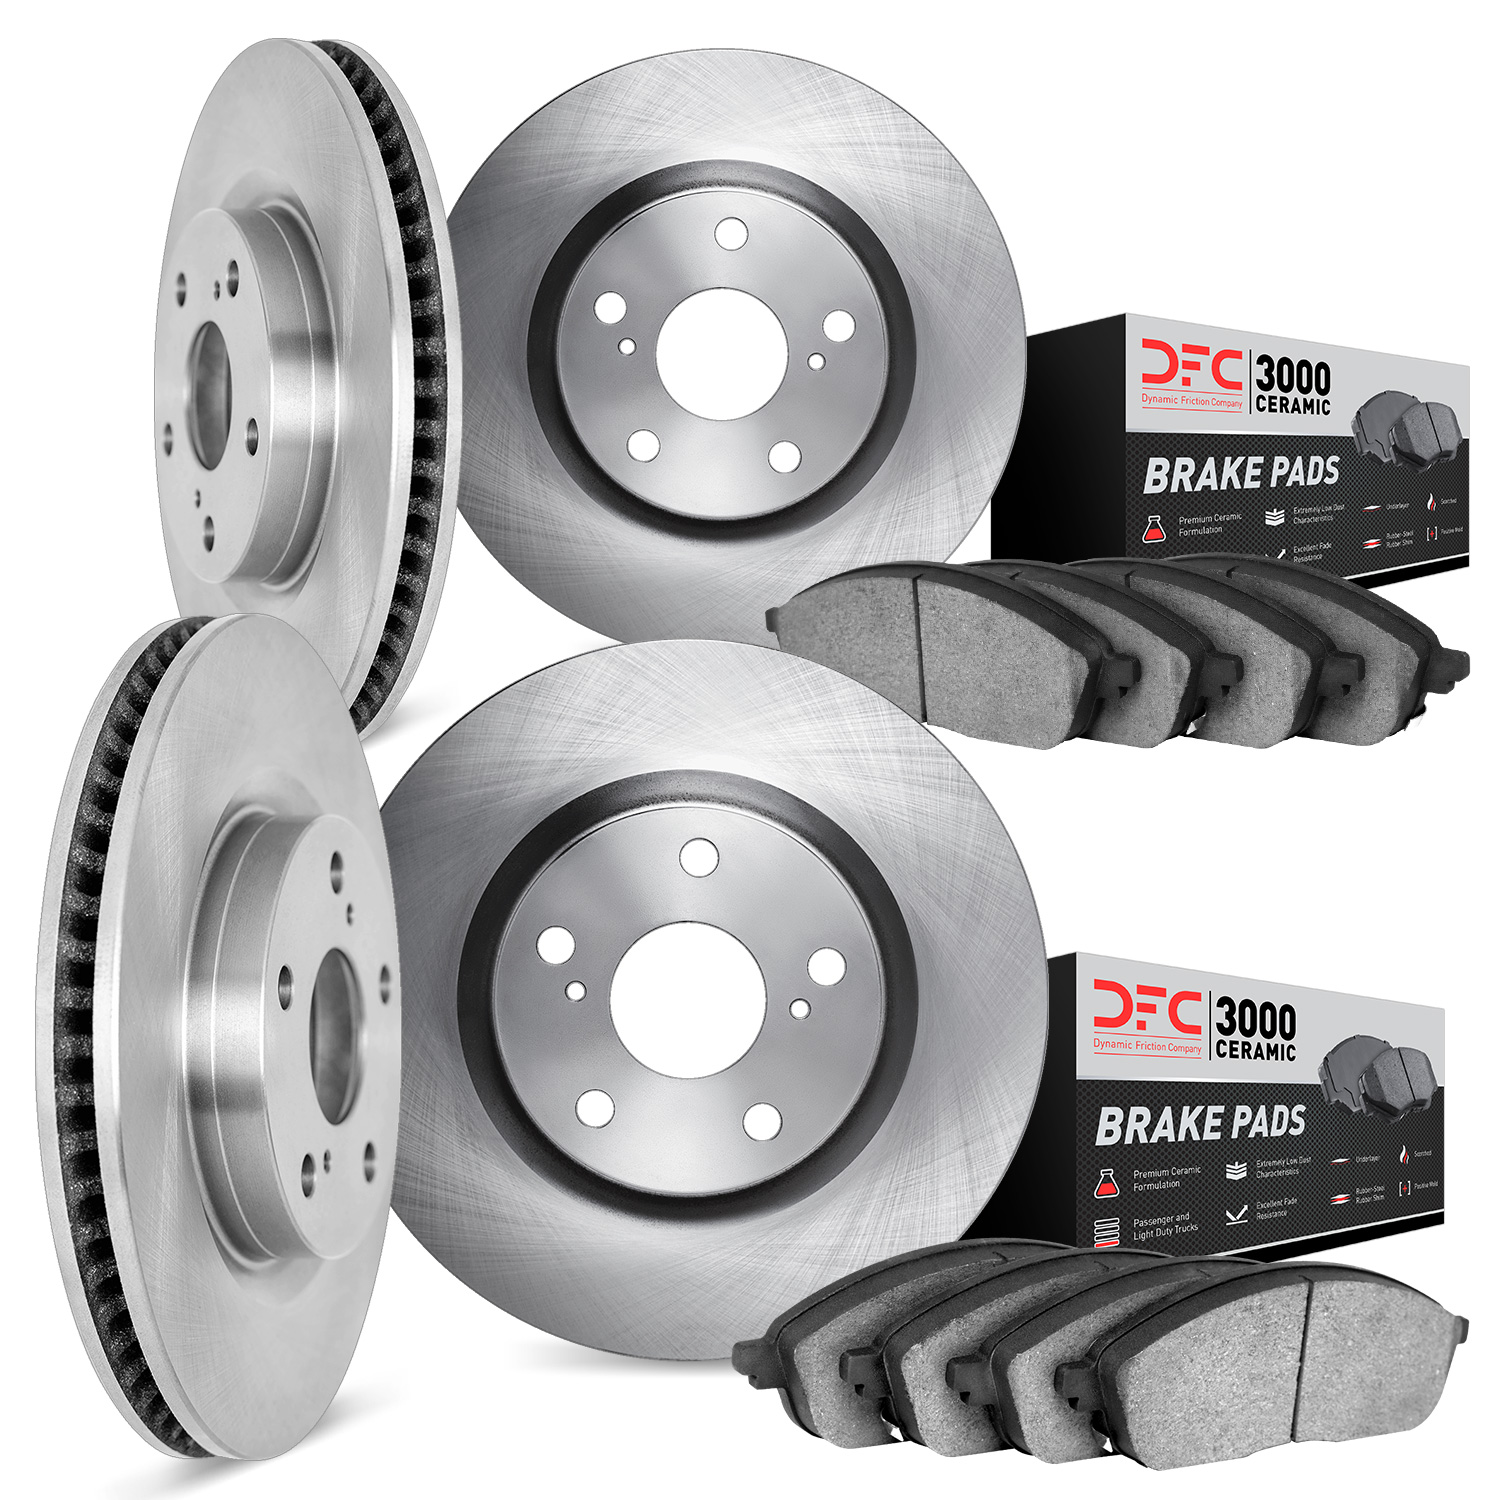 6304-39018 Brake Rotors with 3000-Series Ceramic Brake Pads Kit, Fits Select Mopar, Position: Front and Rear